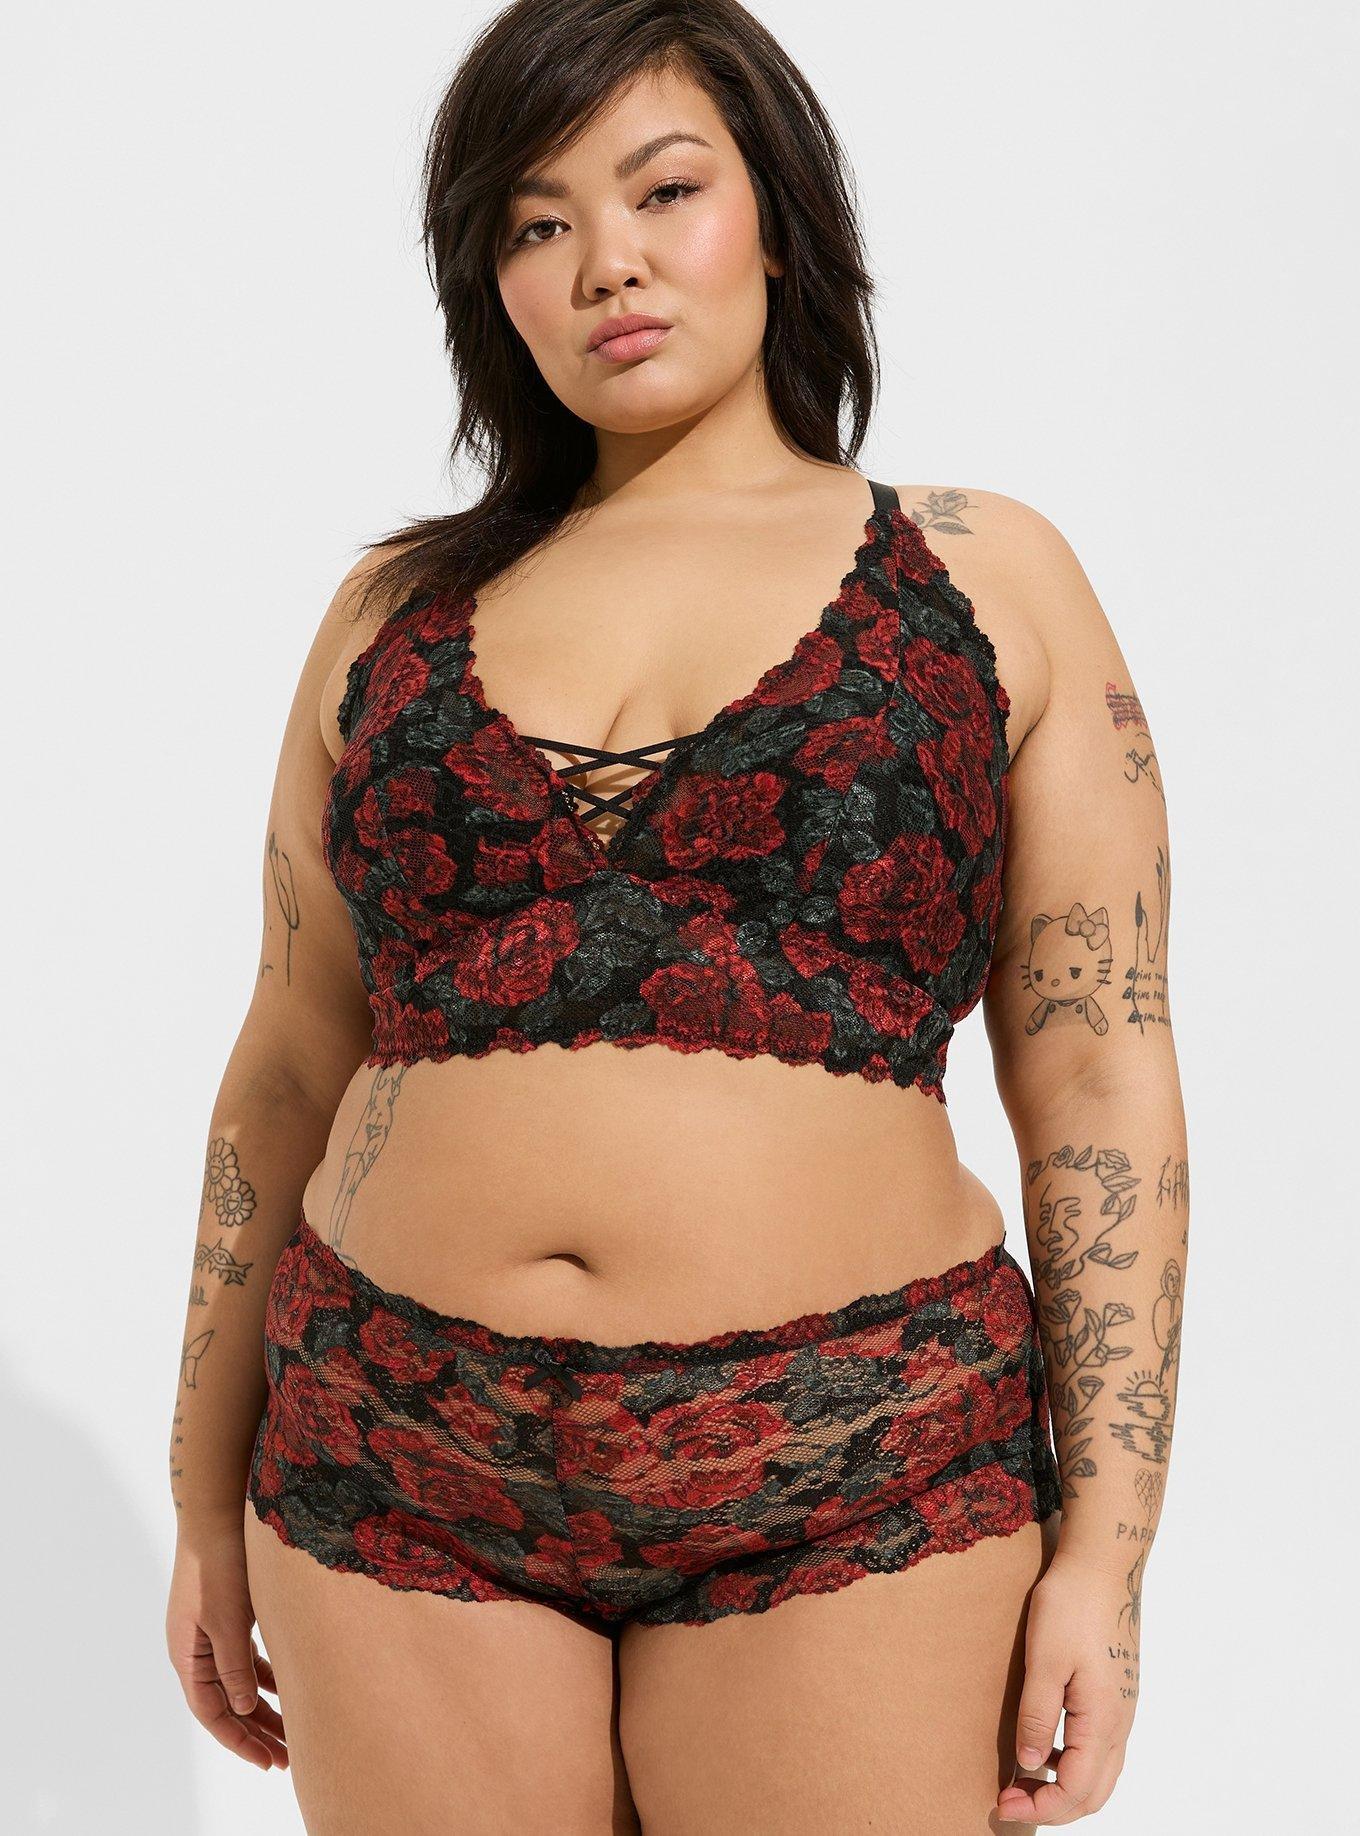 TORRID Simply Lace Mid-Rise Cheeky Panty